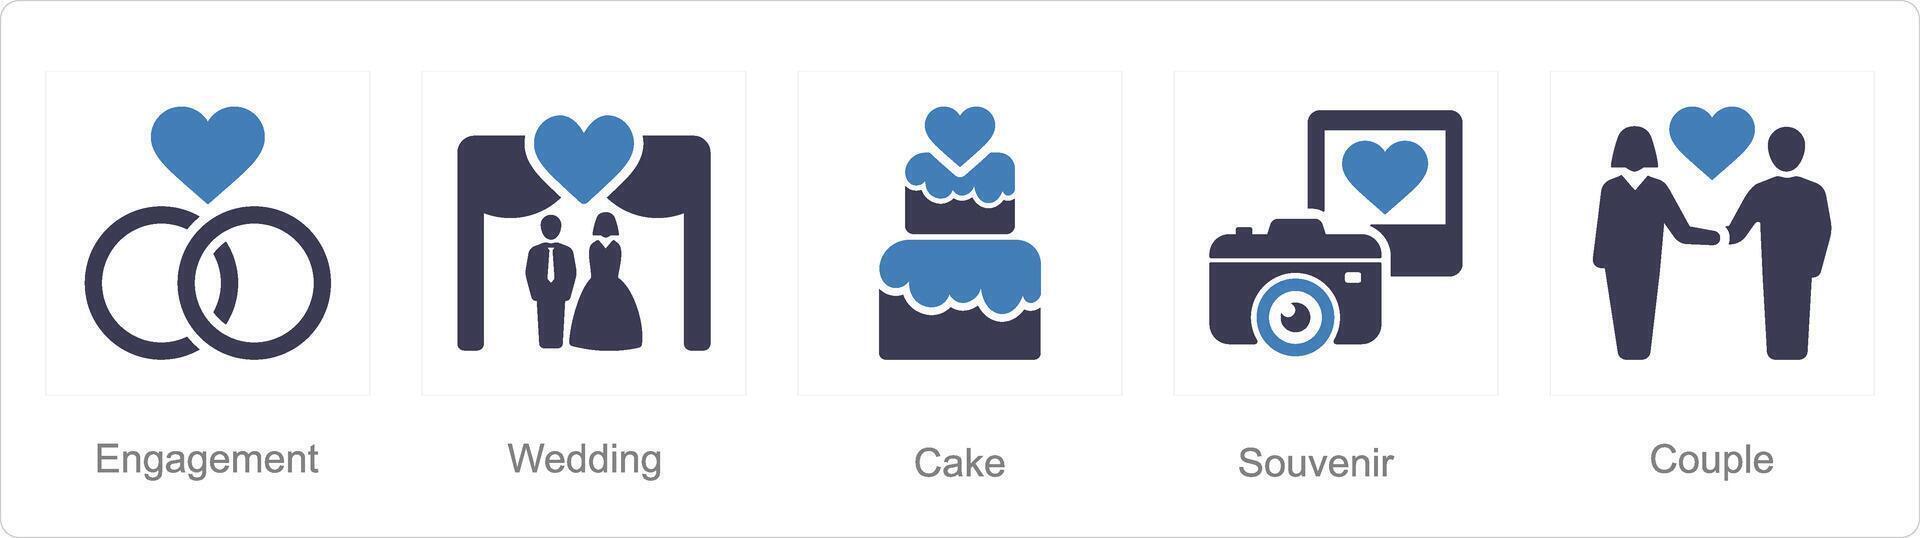 A set of 5 Honeymoon icons as engagement, wedding, cake vector